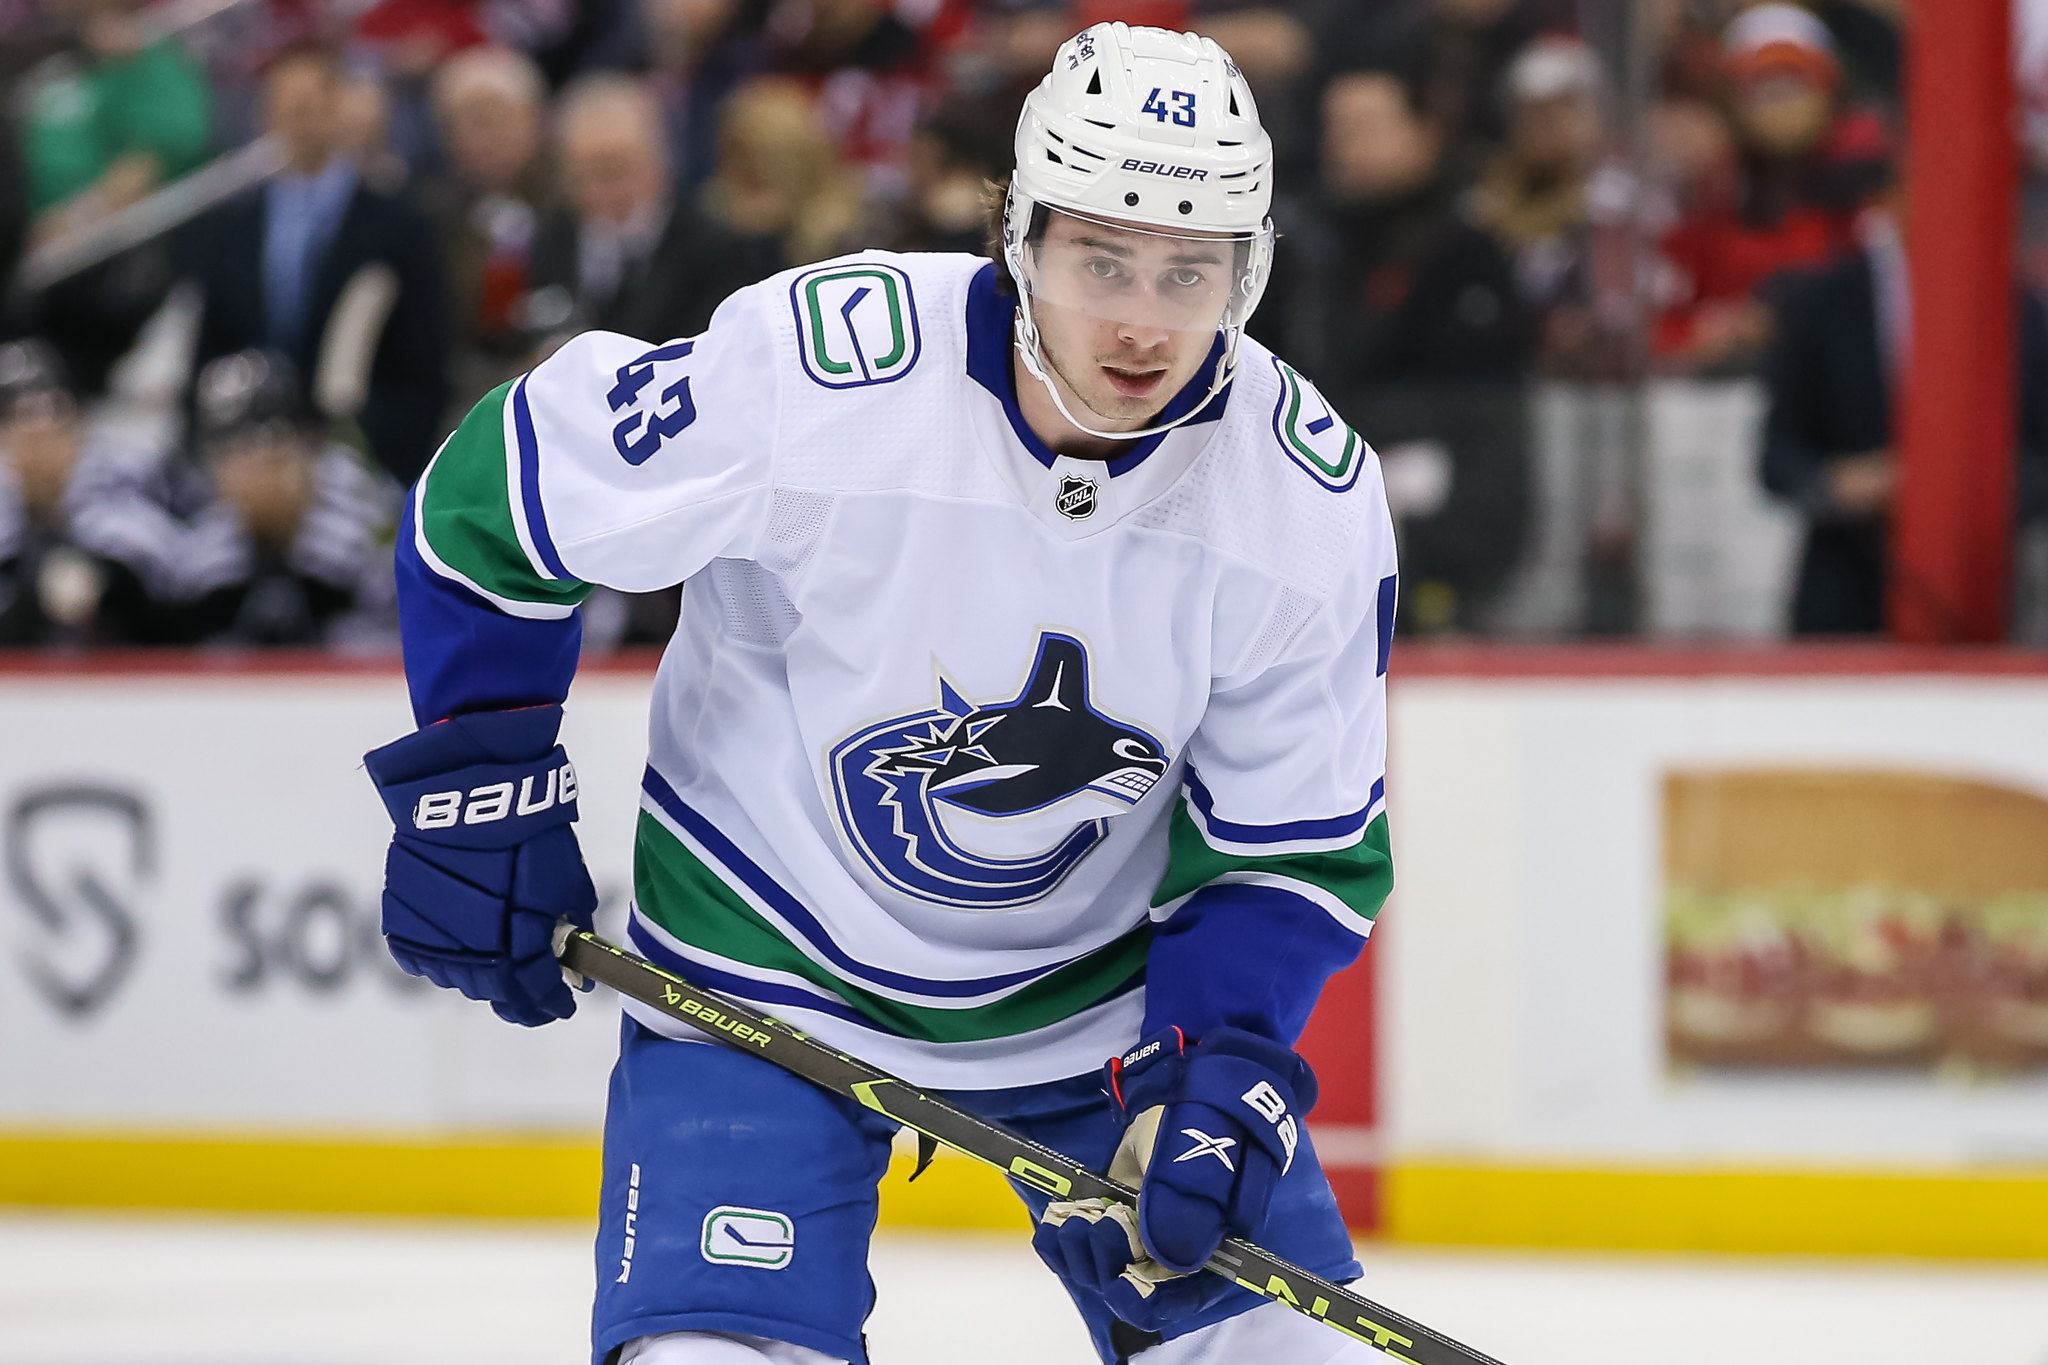 Canucks: 3 takeaways from Quinn Hughes' rookie season - Page 2